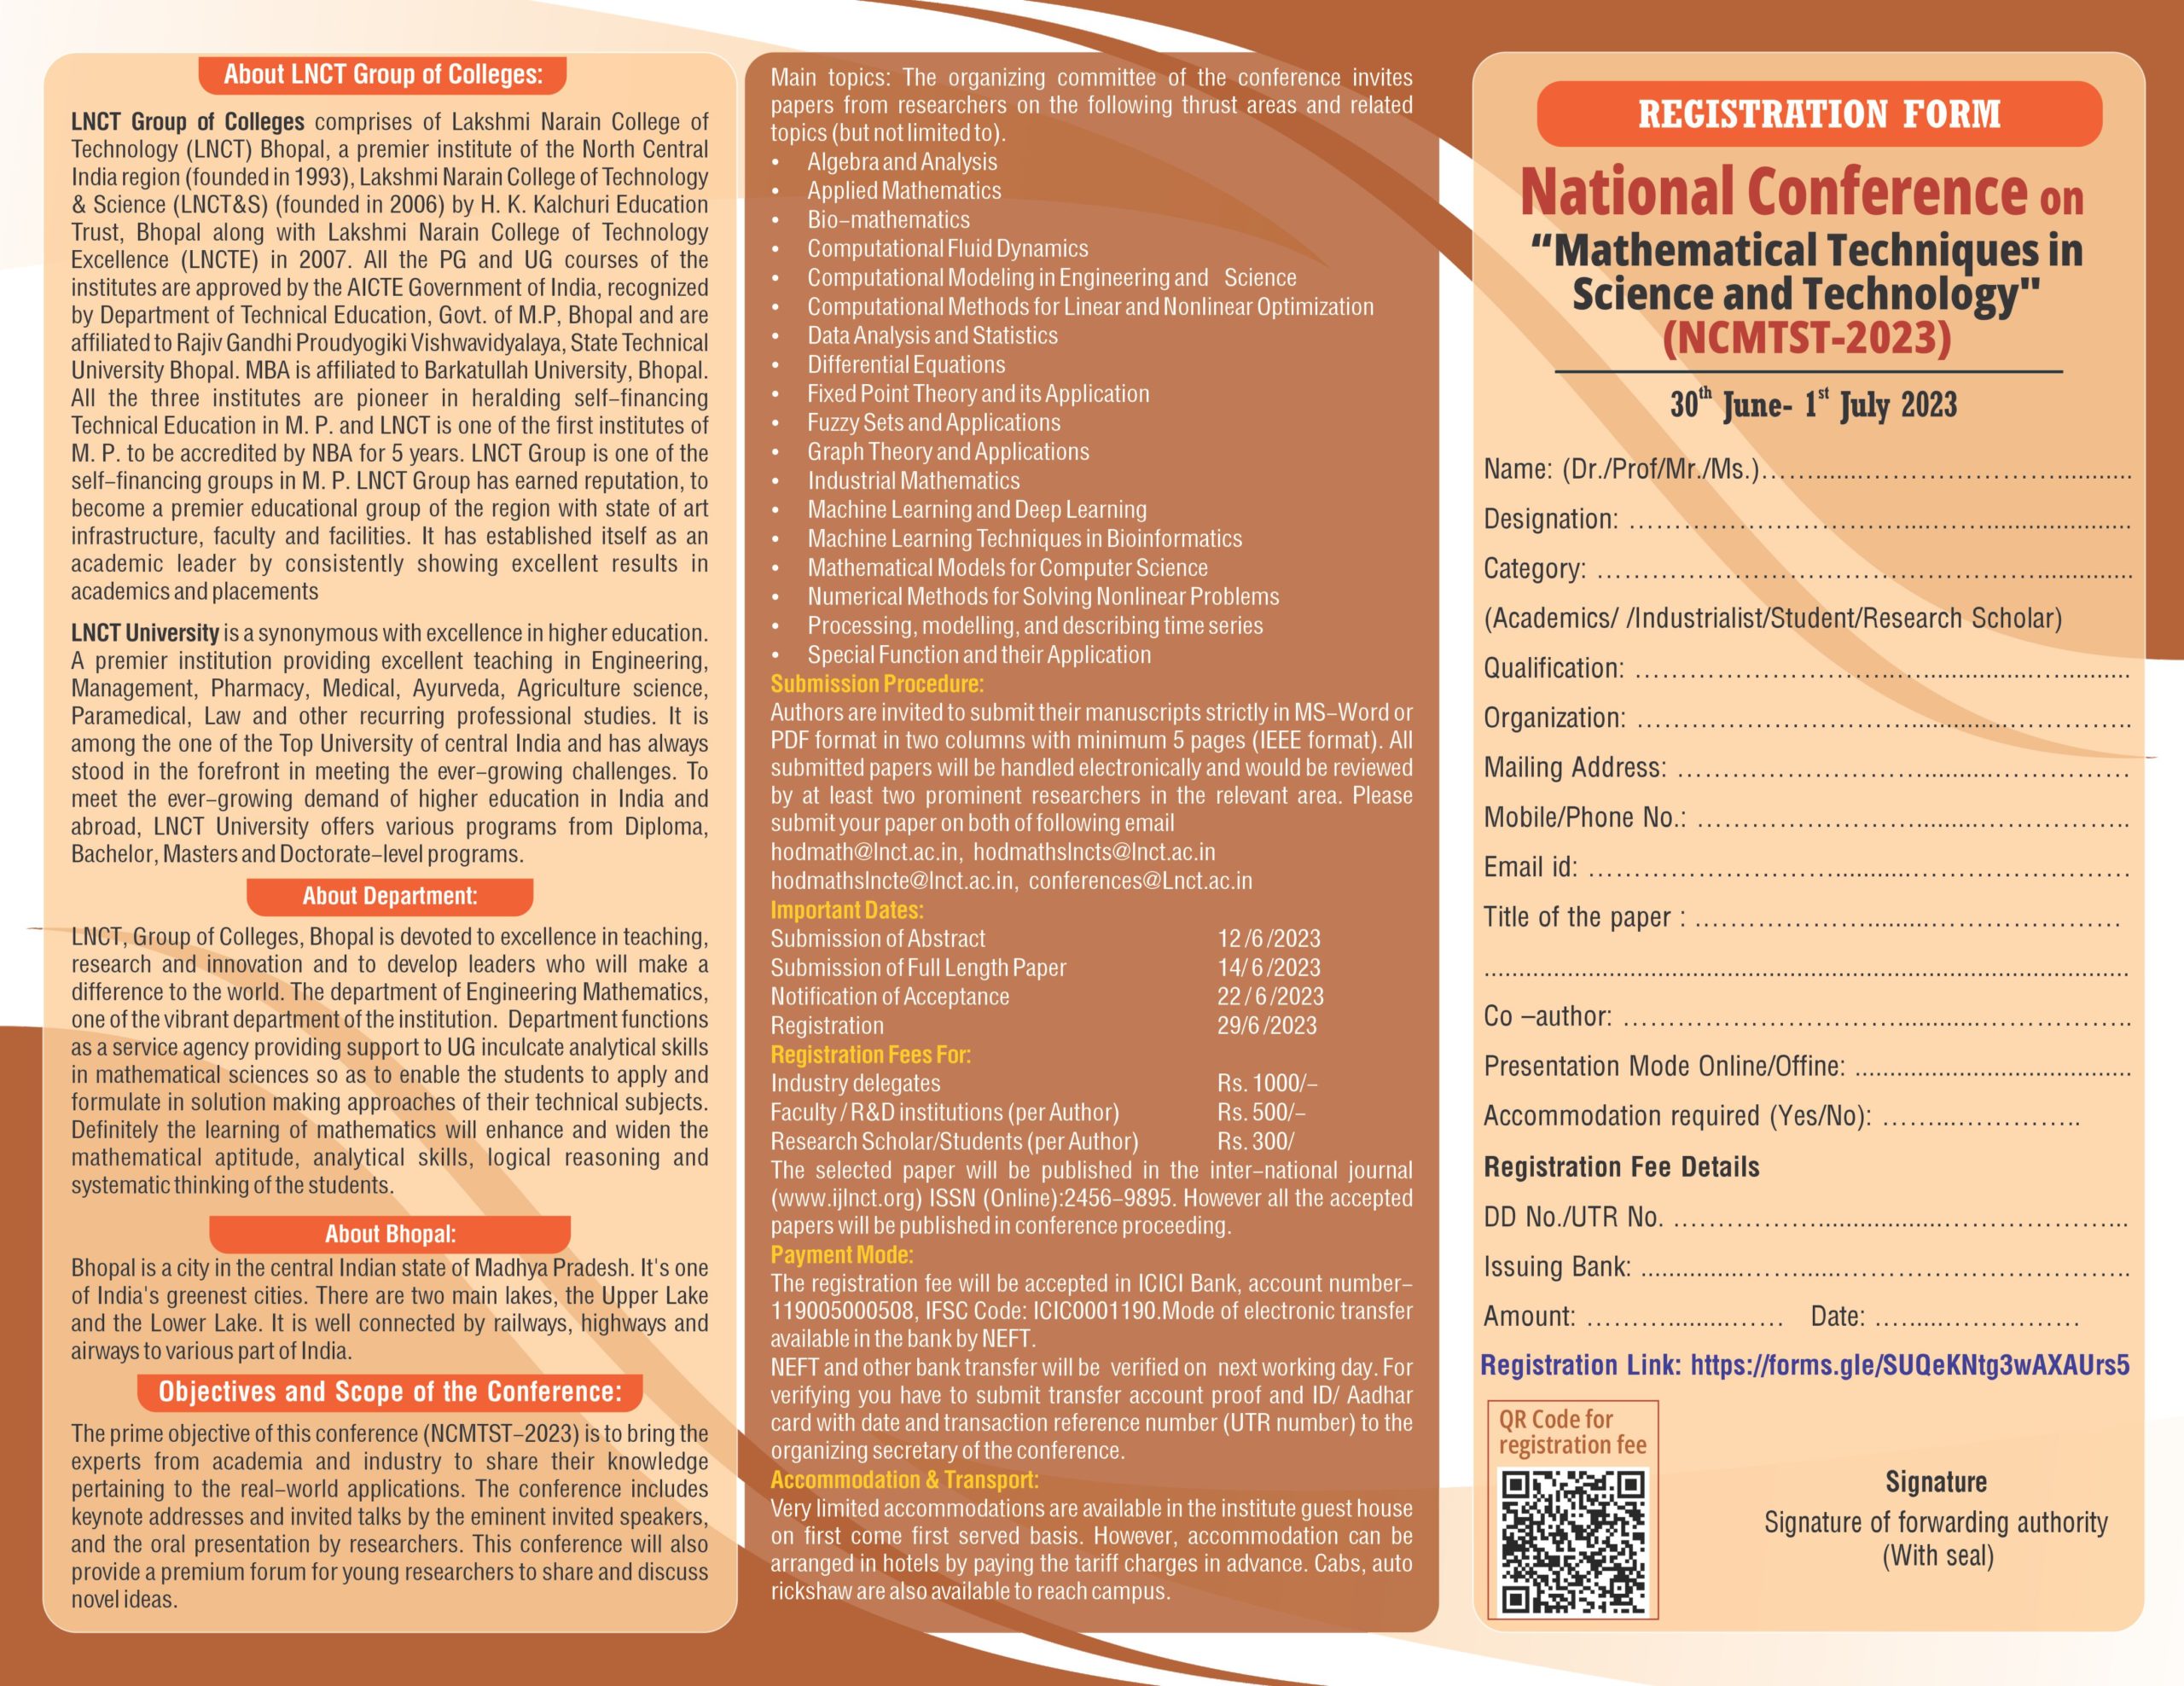 National Conference on Mathematical Techniques in Science and Technology 1